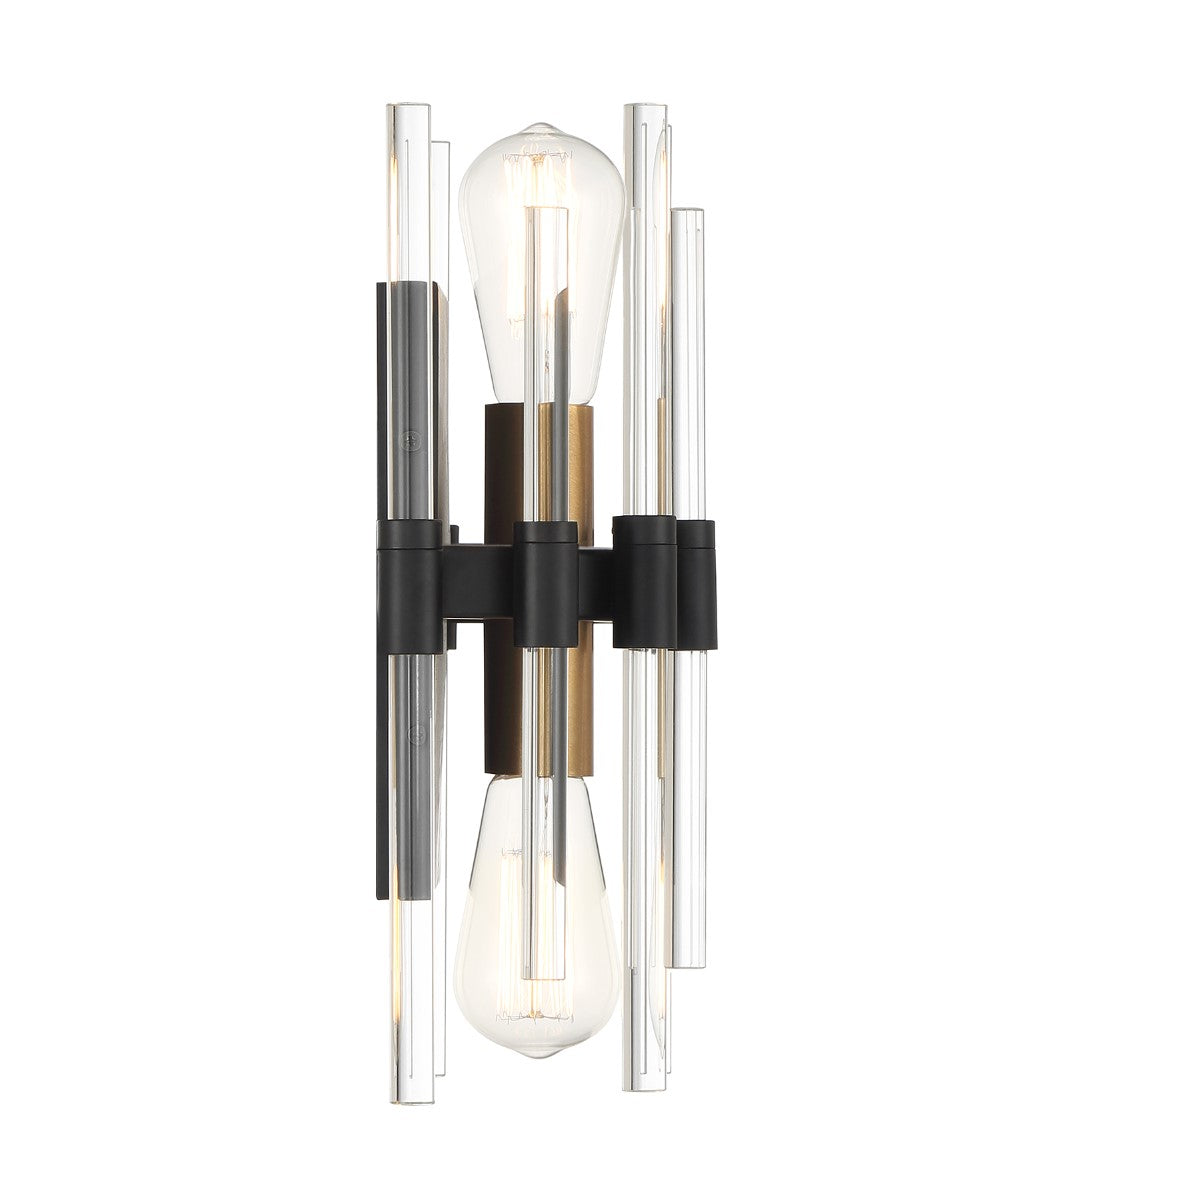 Santiago 13 in. 2 Lights Flush Mount Sconce Matte Black with Warm Brass Accents Finish - Bees Lighting